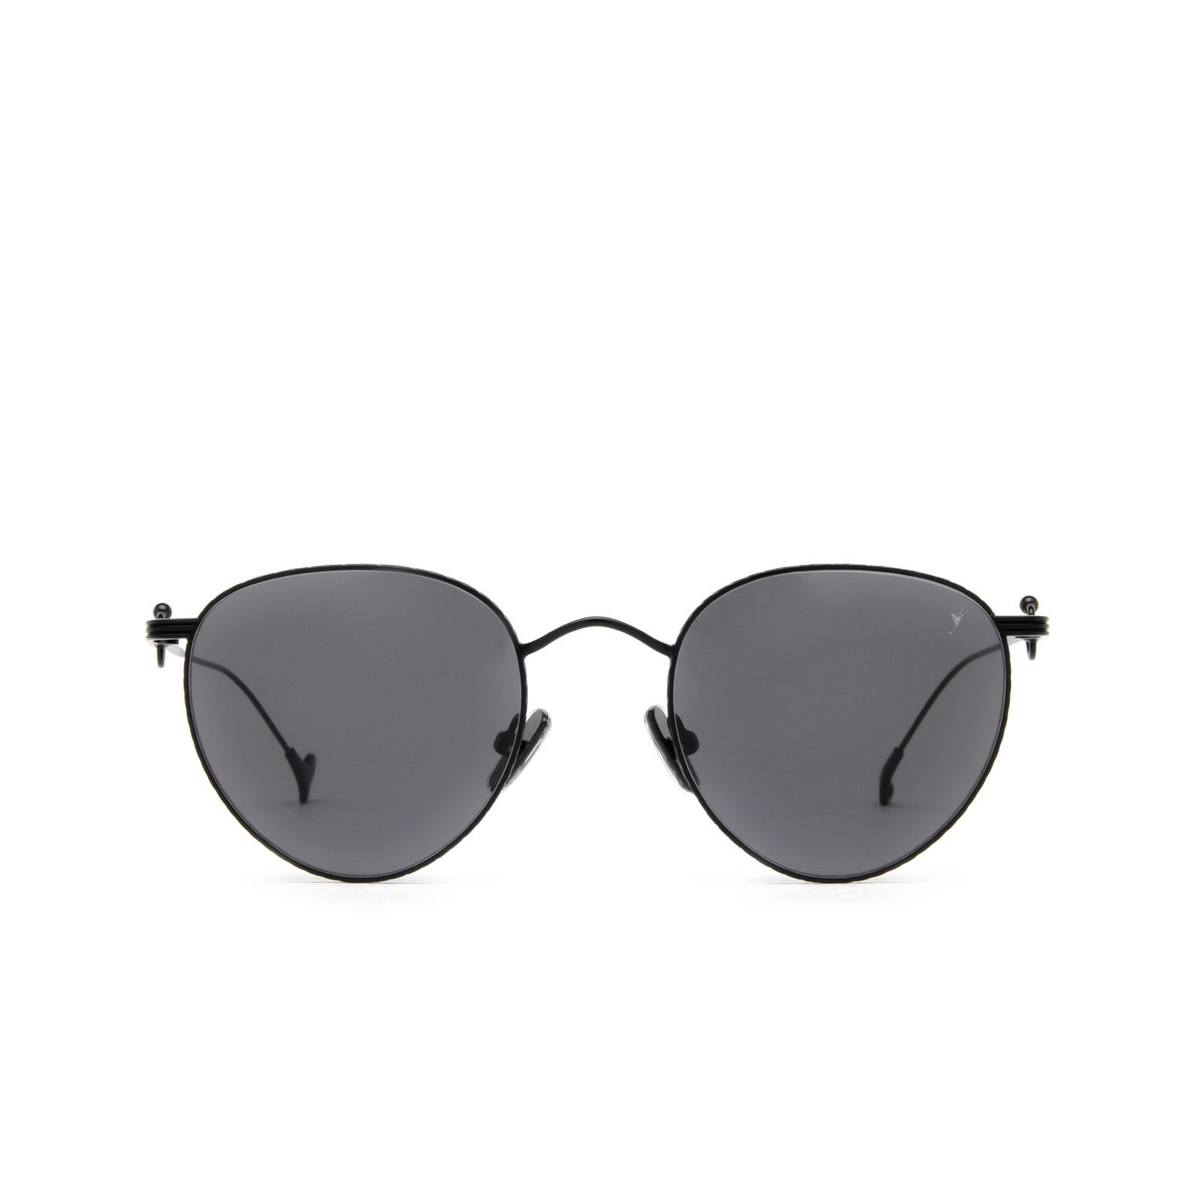 Eyepetizer LUNE Sunglasses C.6-7 Black - front view